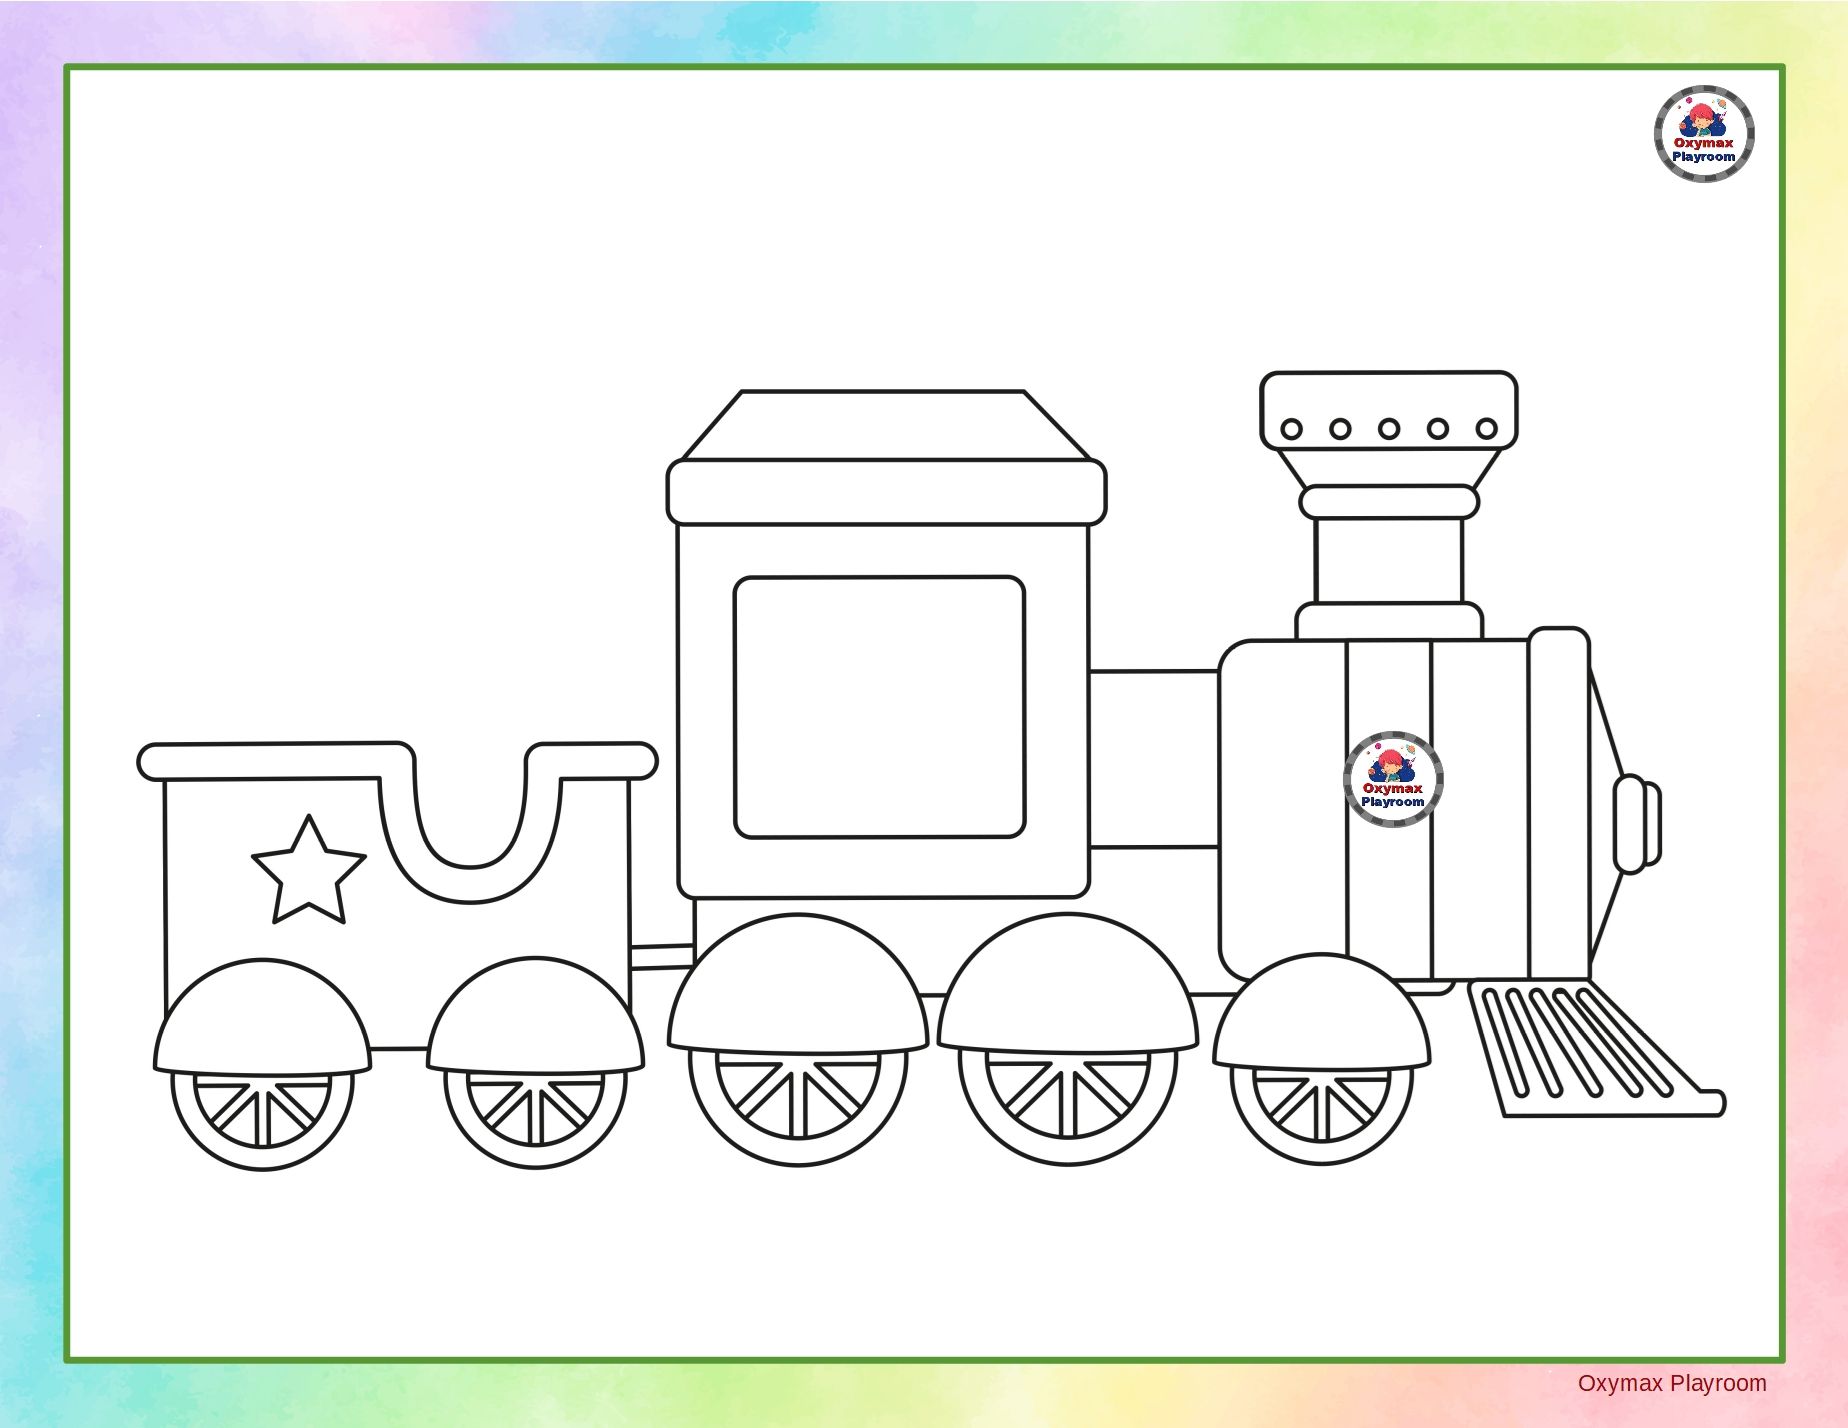 50 Free Coloring Pages for Kids – Transportation